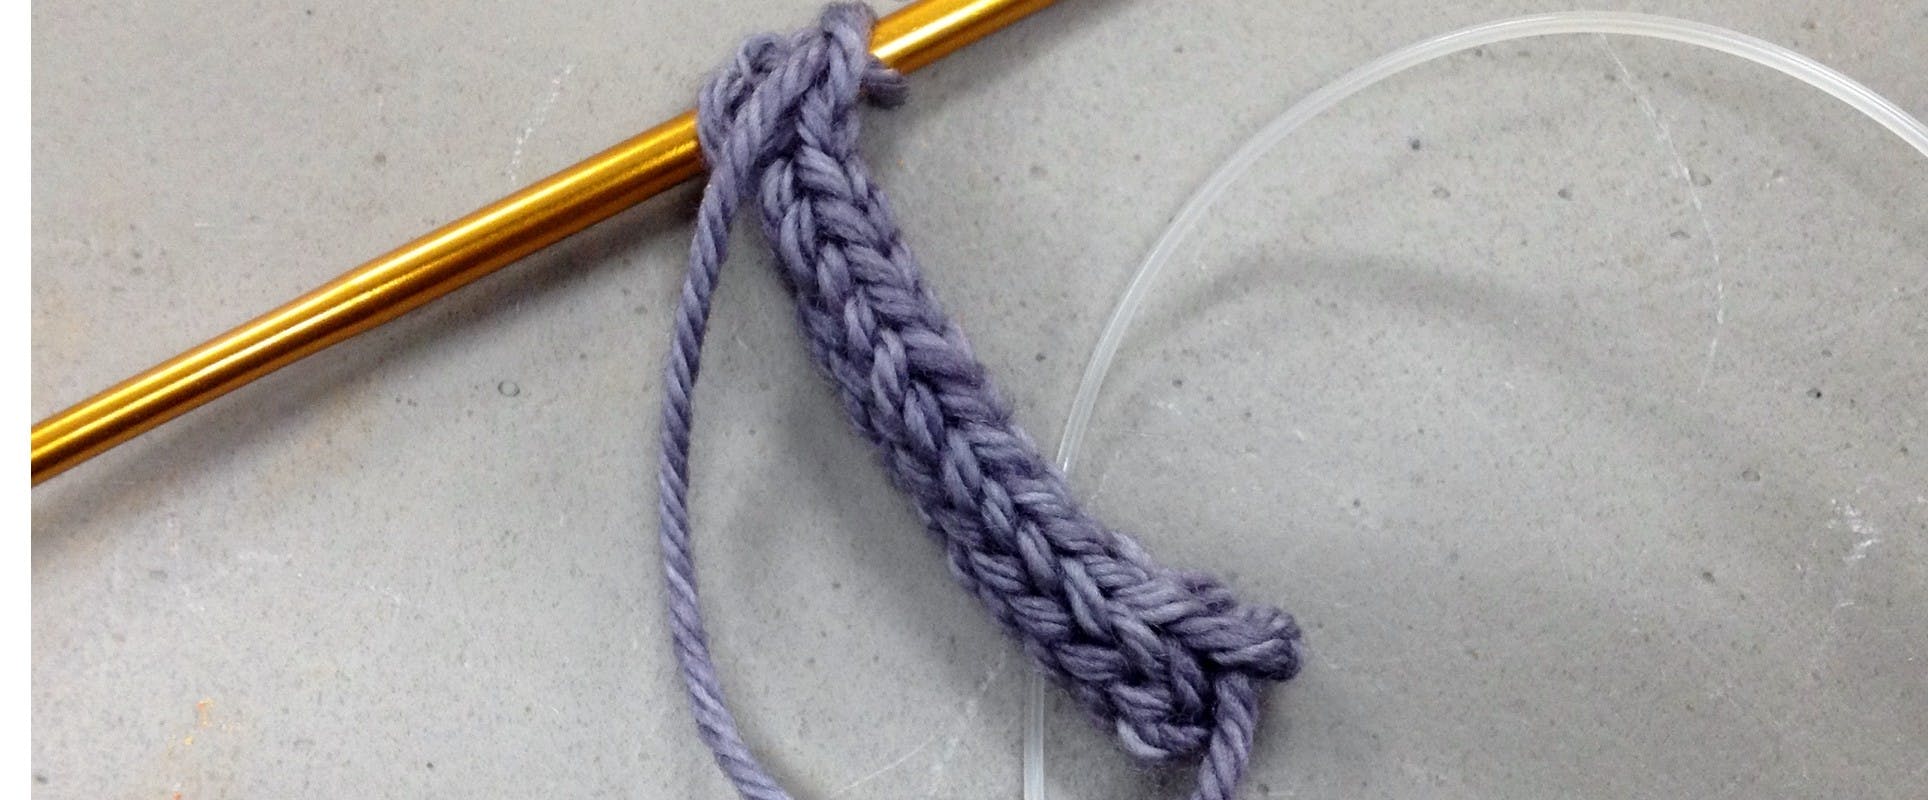 Macrame Cord Conversion Chart: How to change cord sizes - My Mum